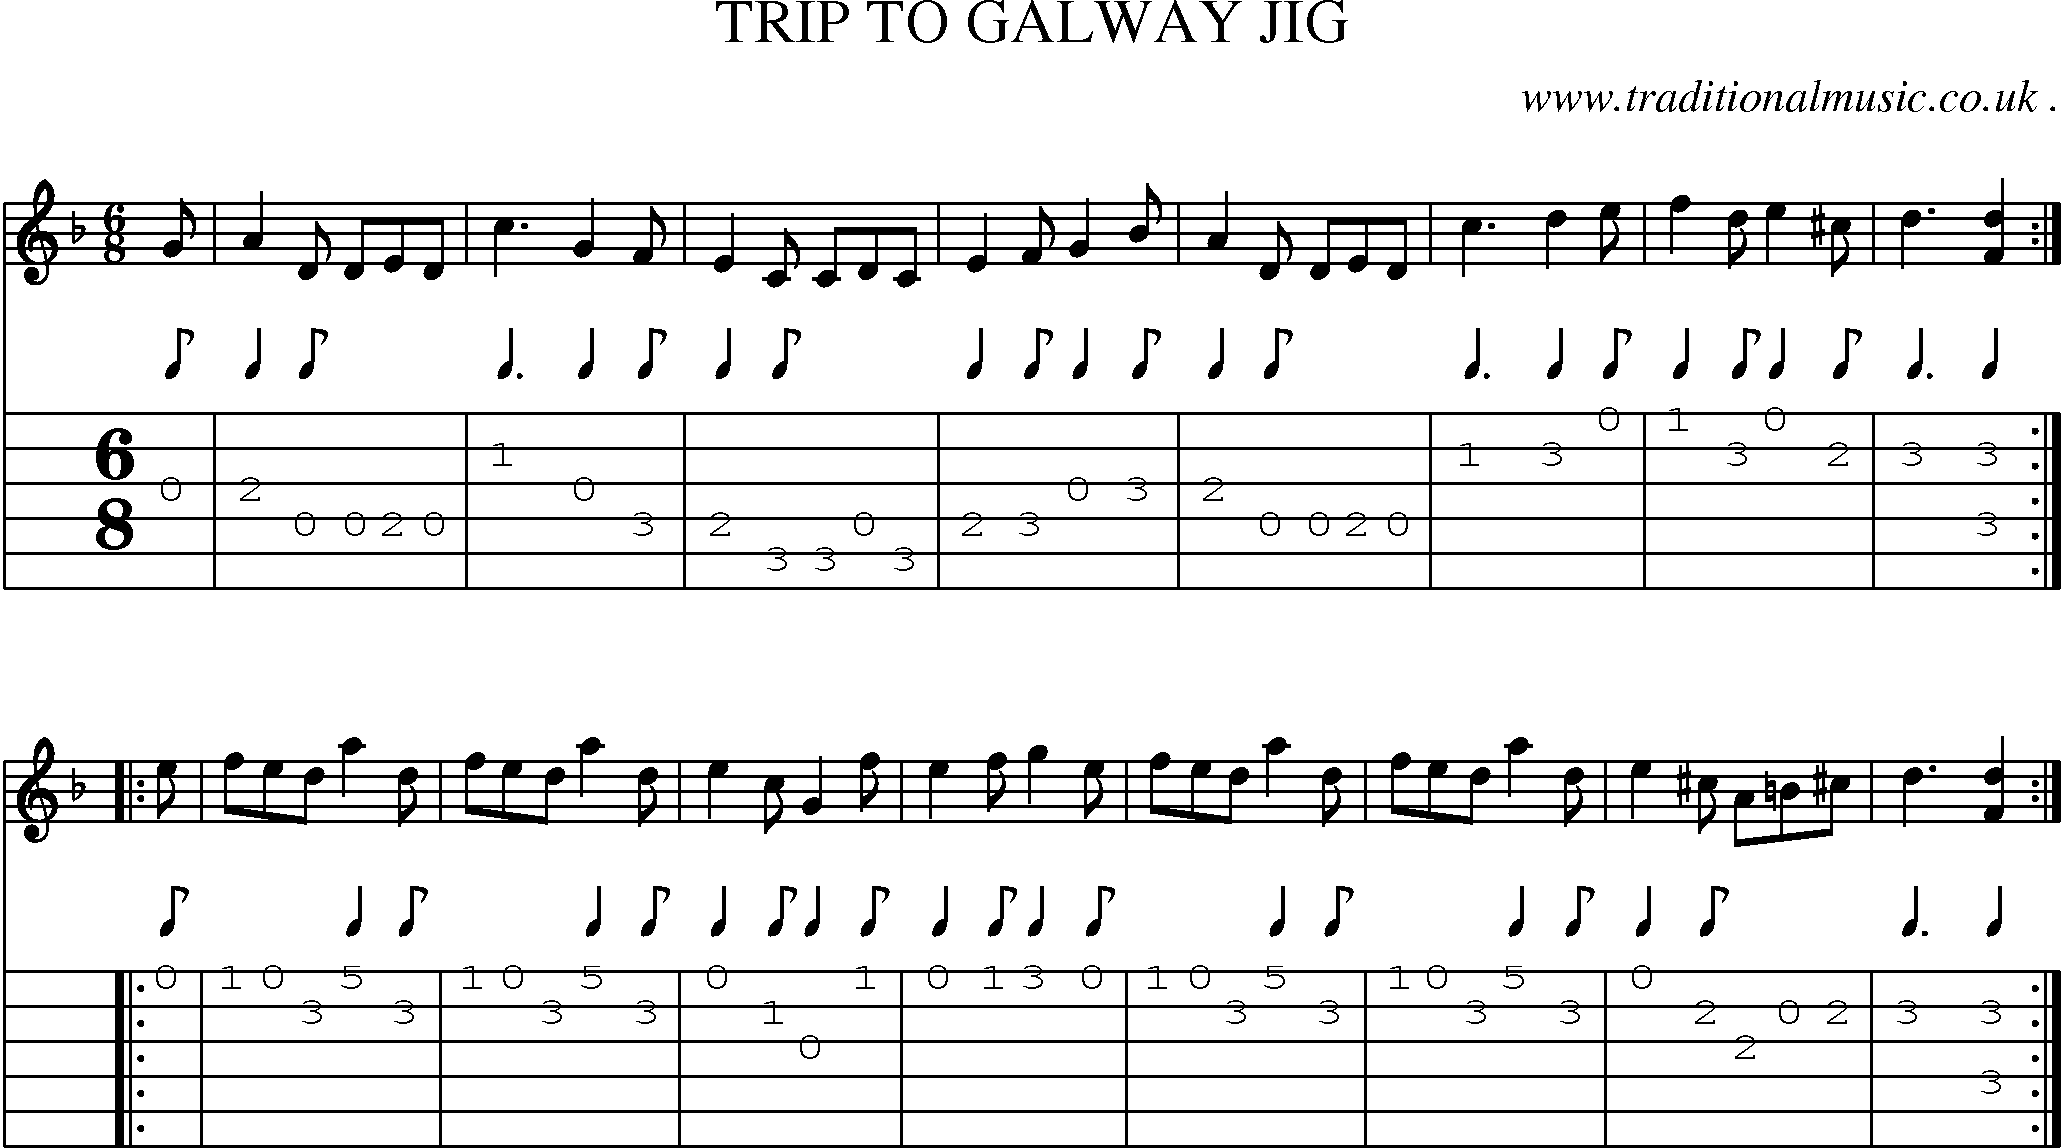 Sheet-Music and Guitar Tabs for Trip To Galway Jig